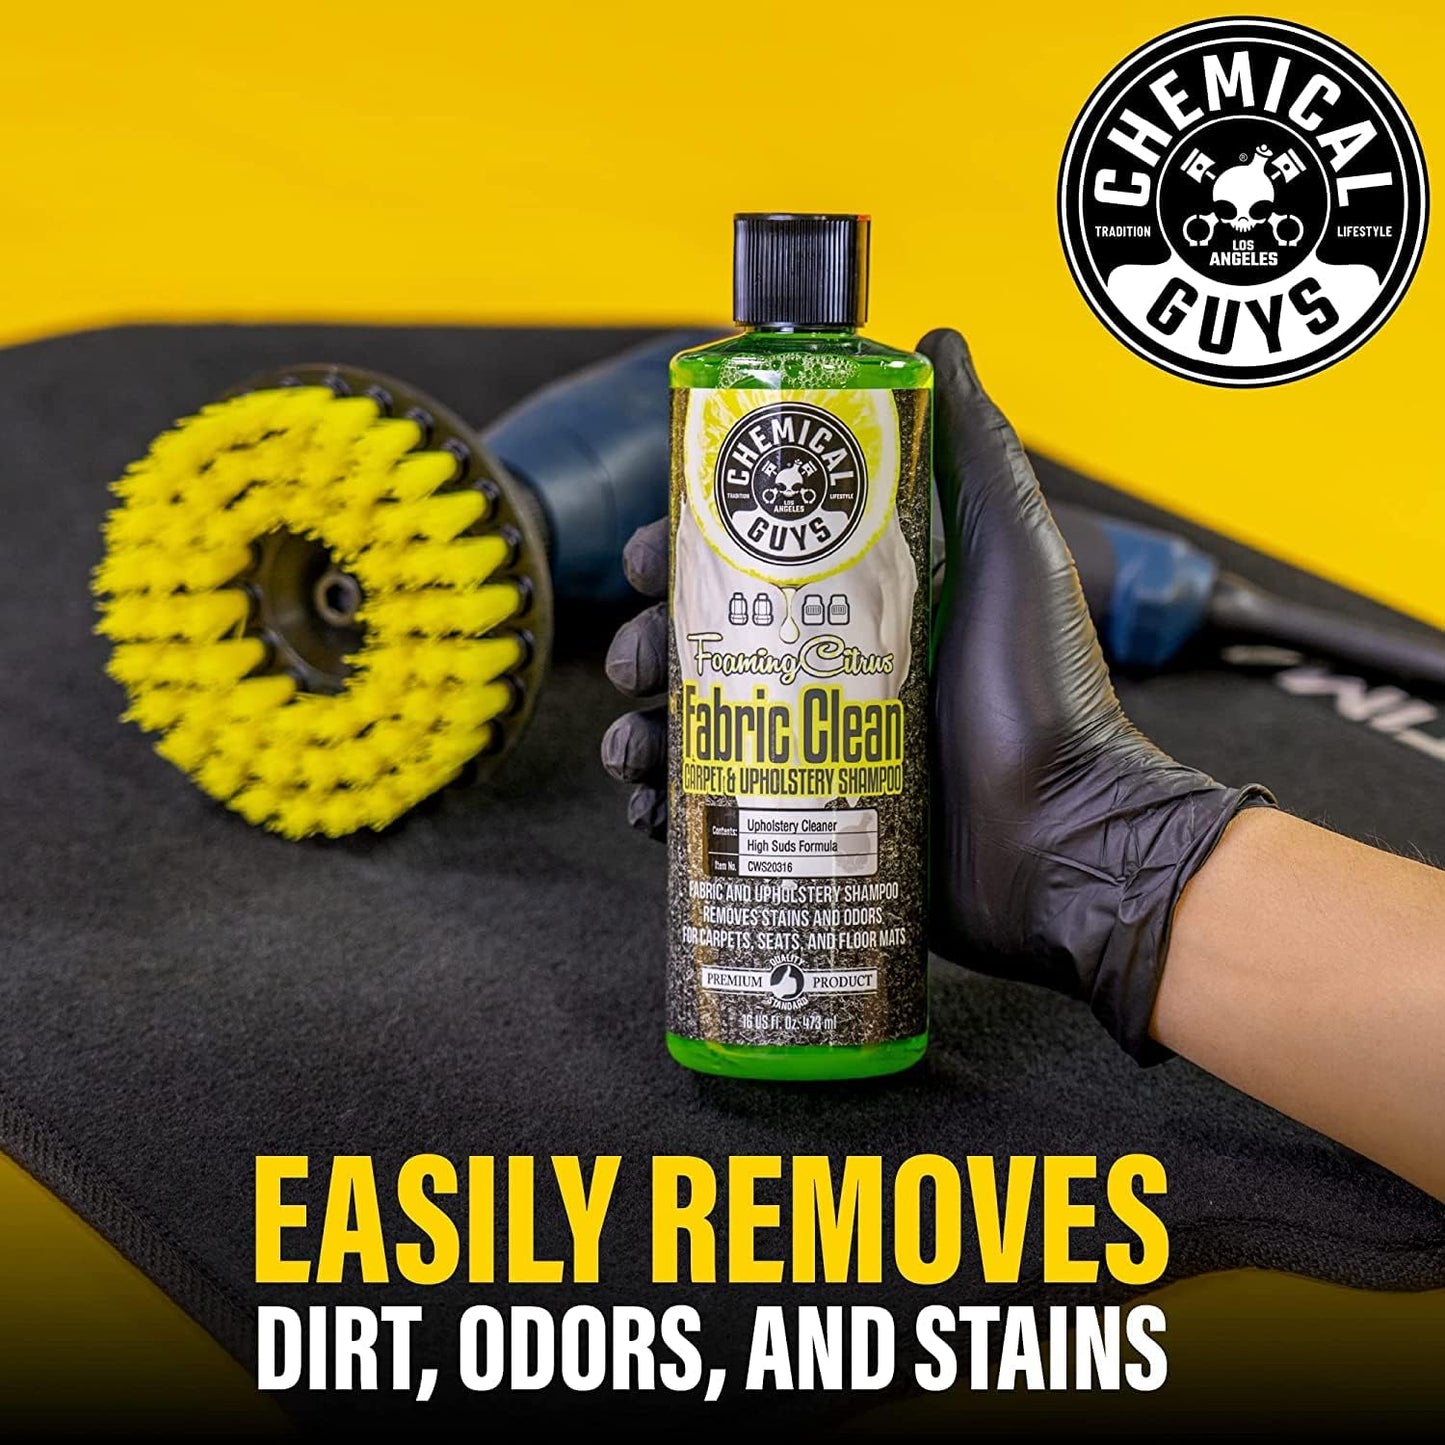 Chemical Guys CWS20316 Foaming Citrus Fabric Clean Carpet & Upholstery Cleaner (Car Carpets, Seats & Floor Mats), Safe for Cars, Home, Office, & More, 16 fl oz, Citrus Scent